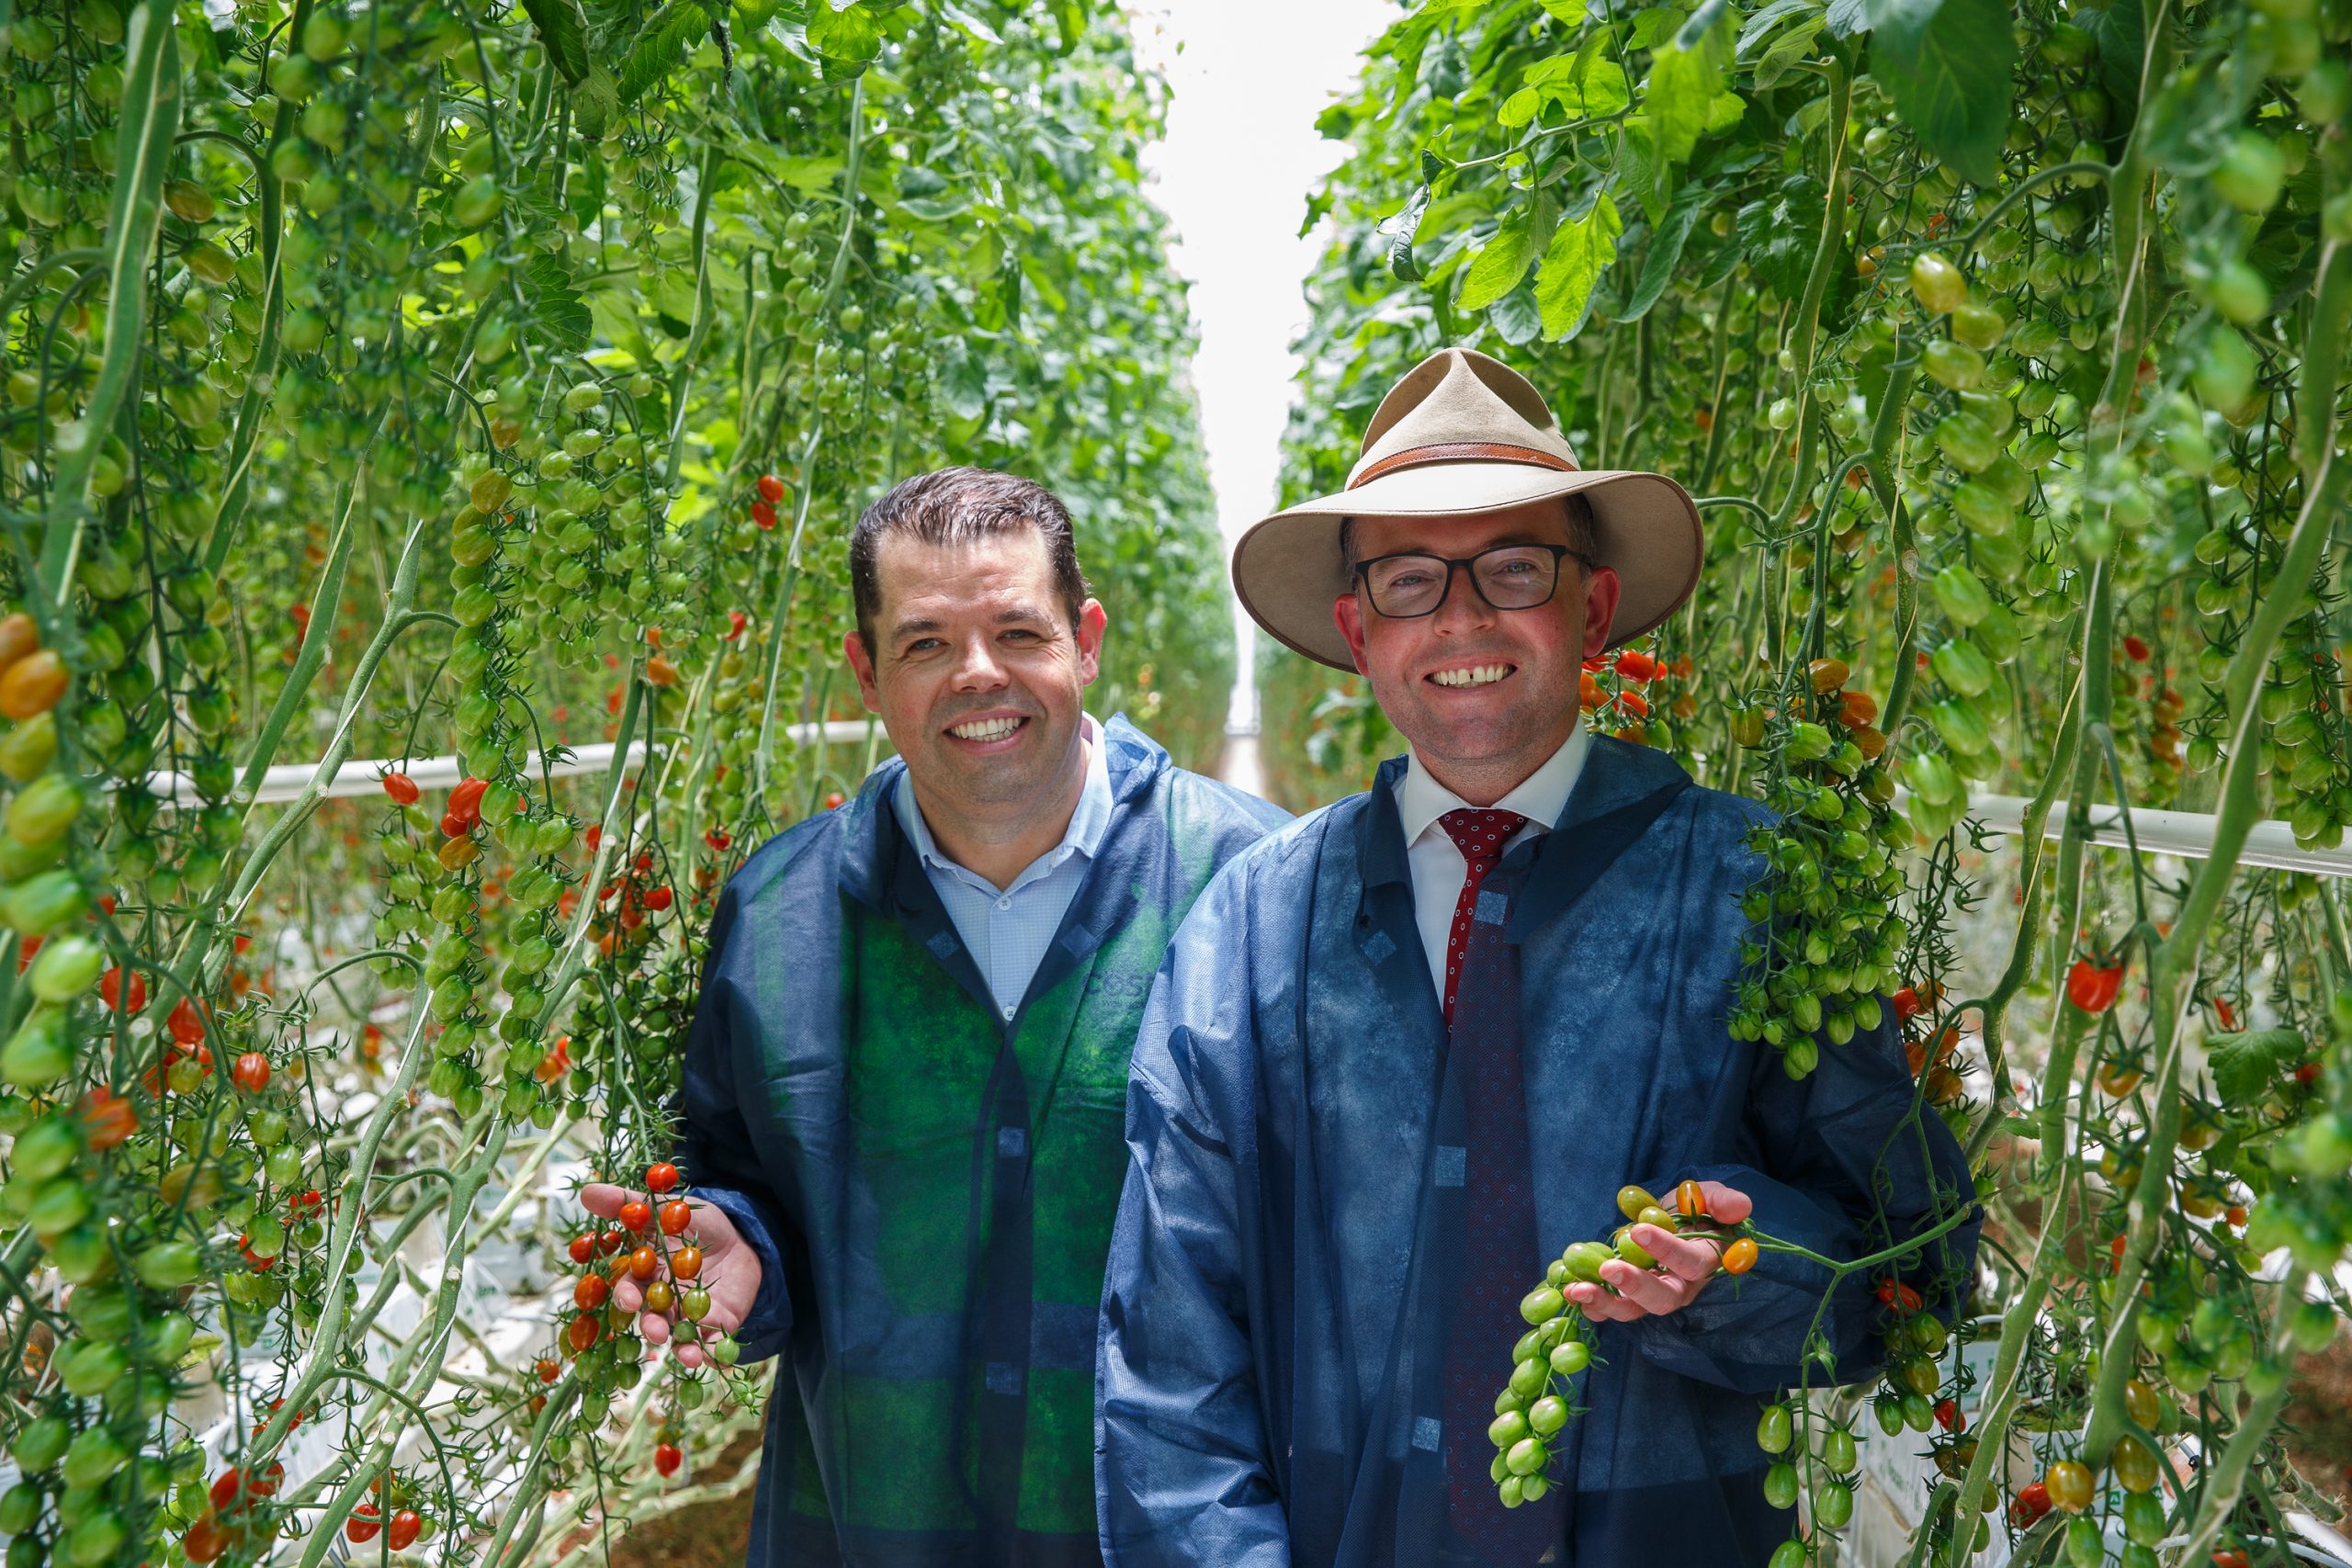 The expansion of Costa's Tomato Exchange glasshouse facility near Guyra, NSW, brings its total footprint to 40+ hectares, making it the largest such complex in the Southern Hemisphere.